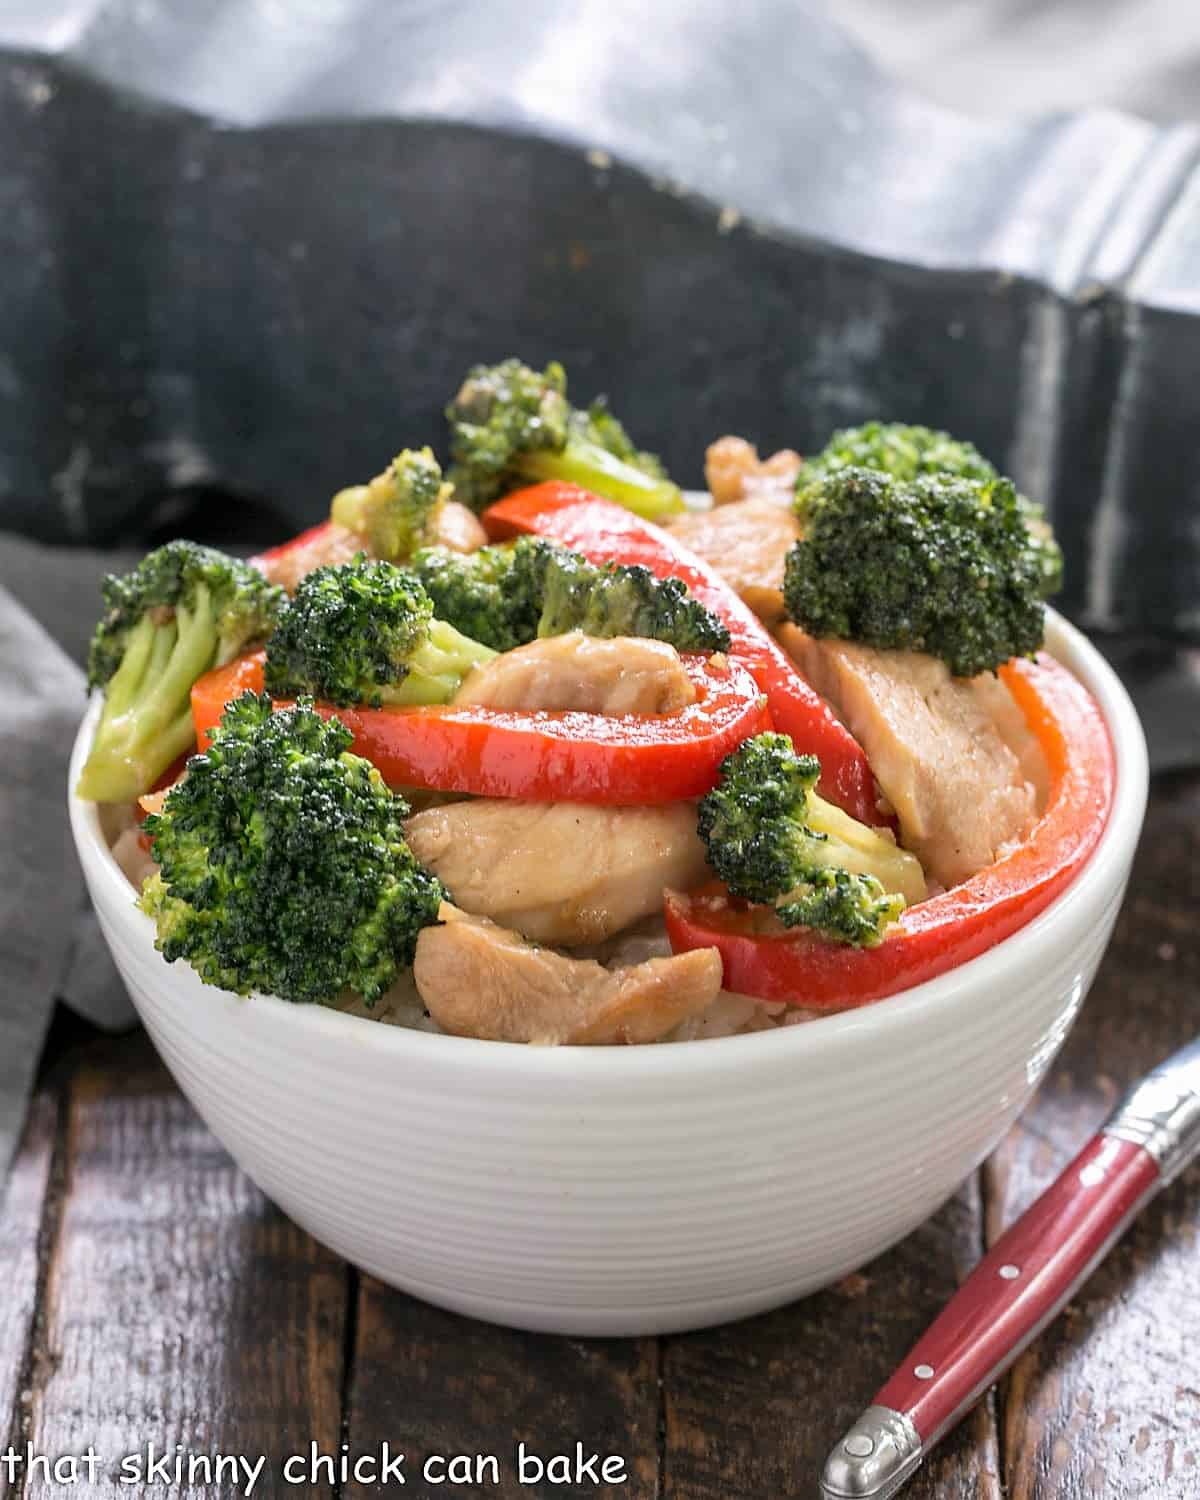 Bowl of chicken broccoli stir fry with a red handle fork.